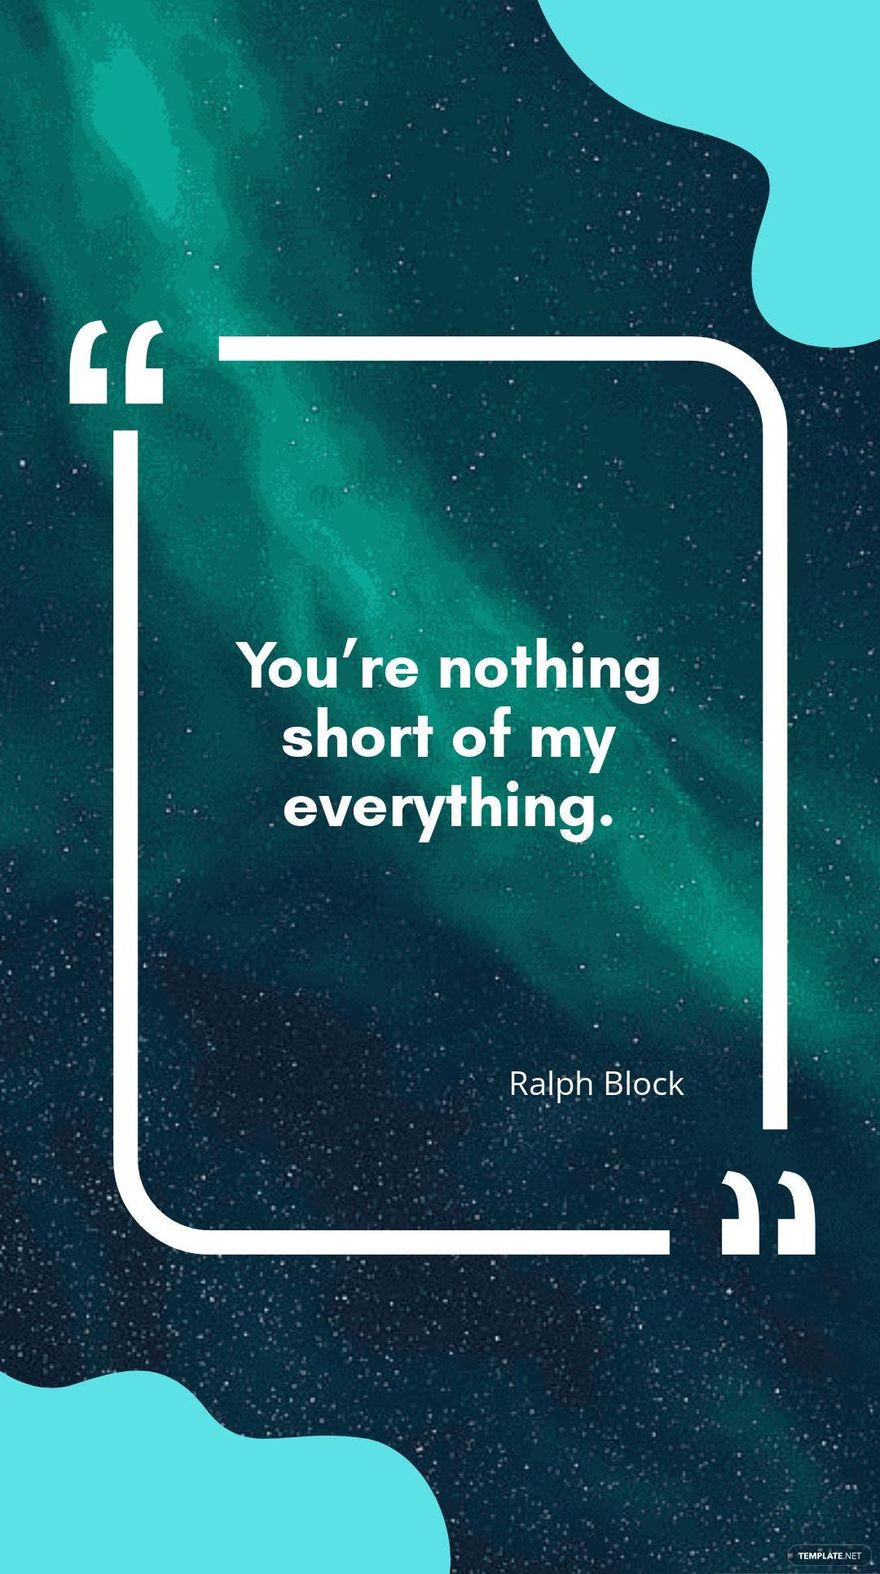 Ralph Block - “You’re nothing short of my everything.”